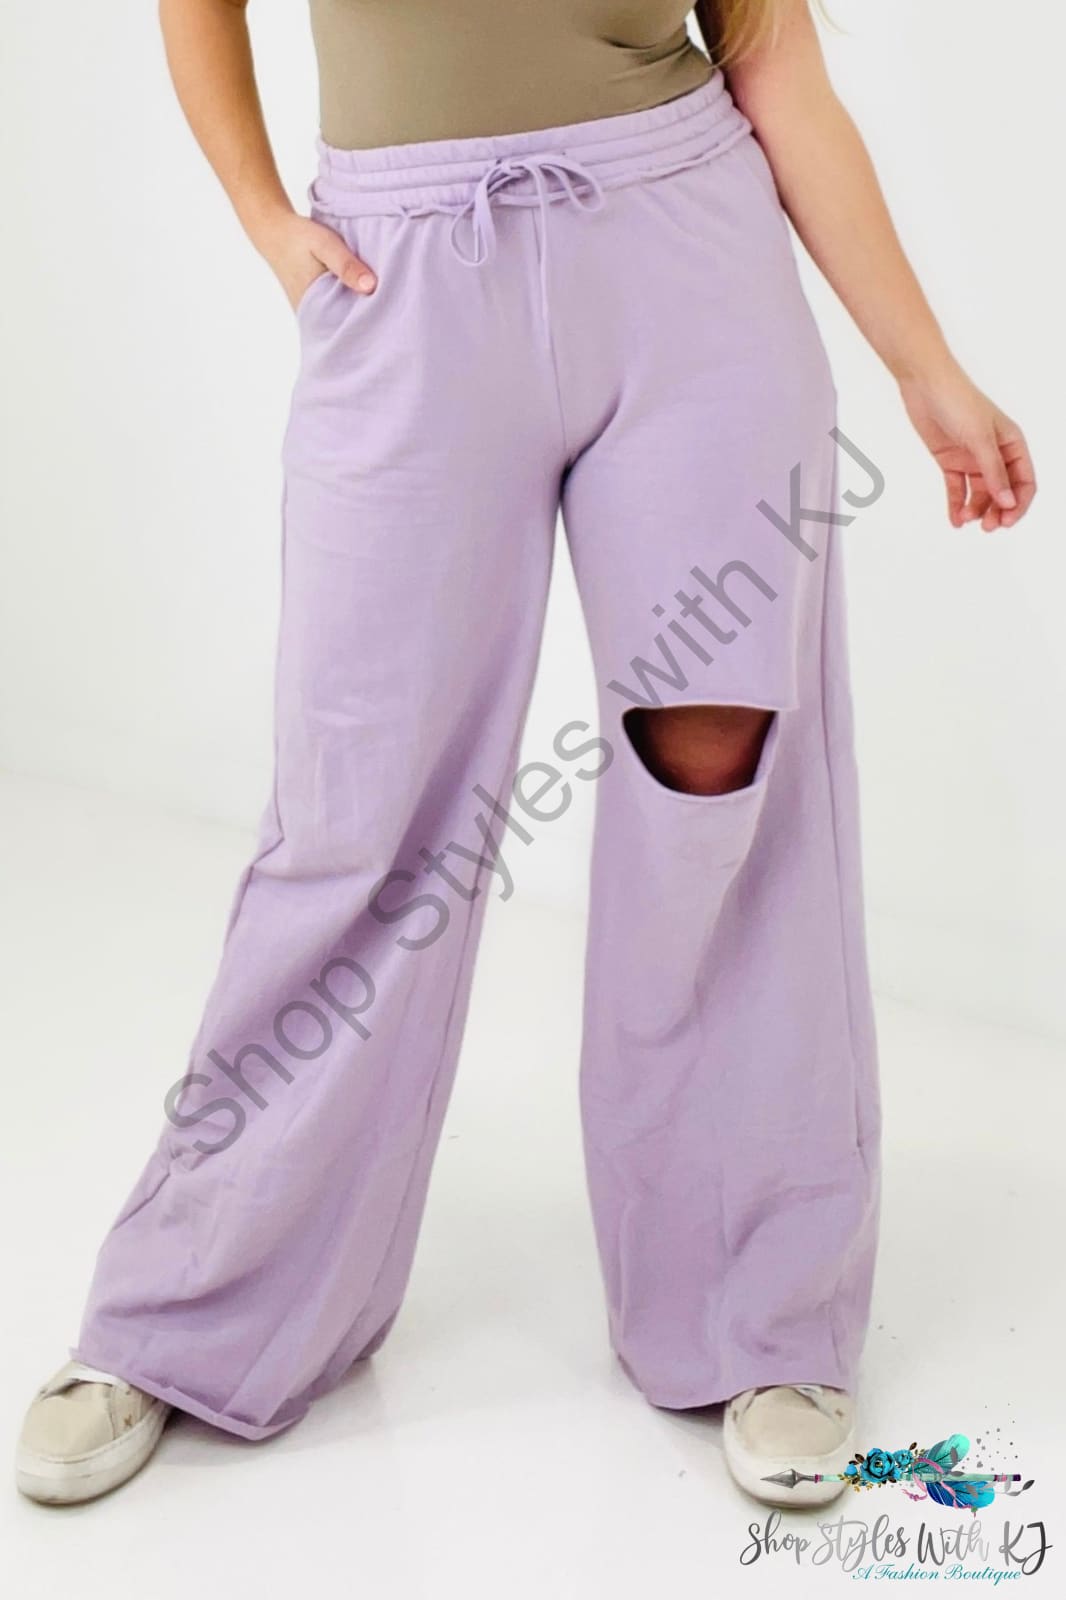 Distressed Knee French Terry Sweats With Pockets Dusty Lavender / S Pants